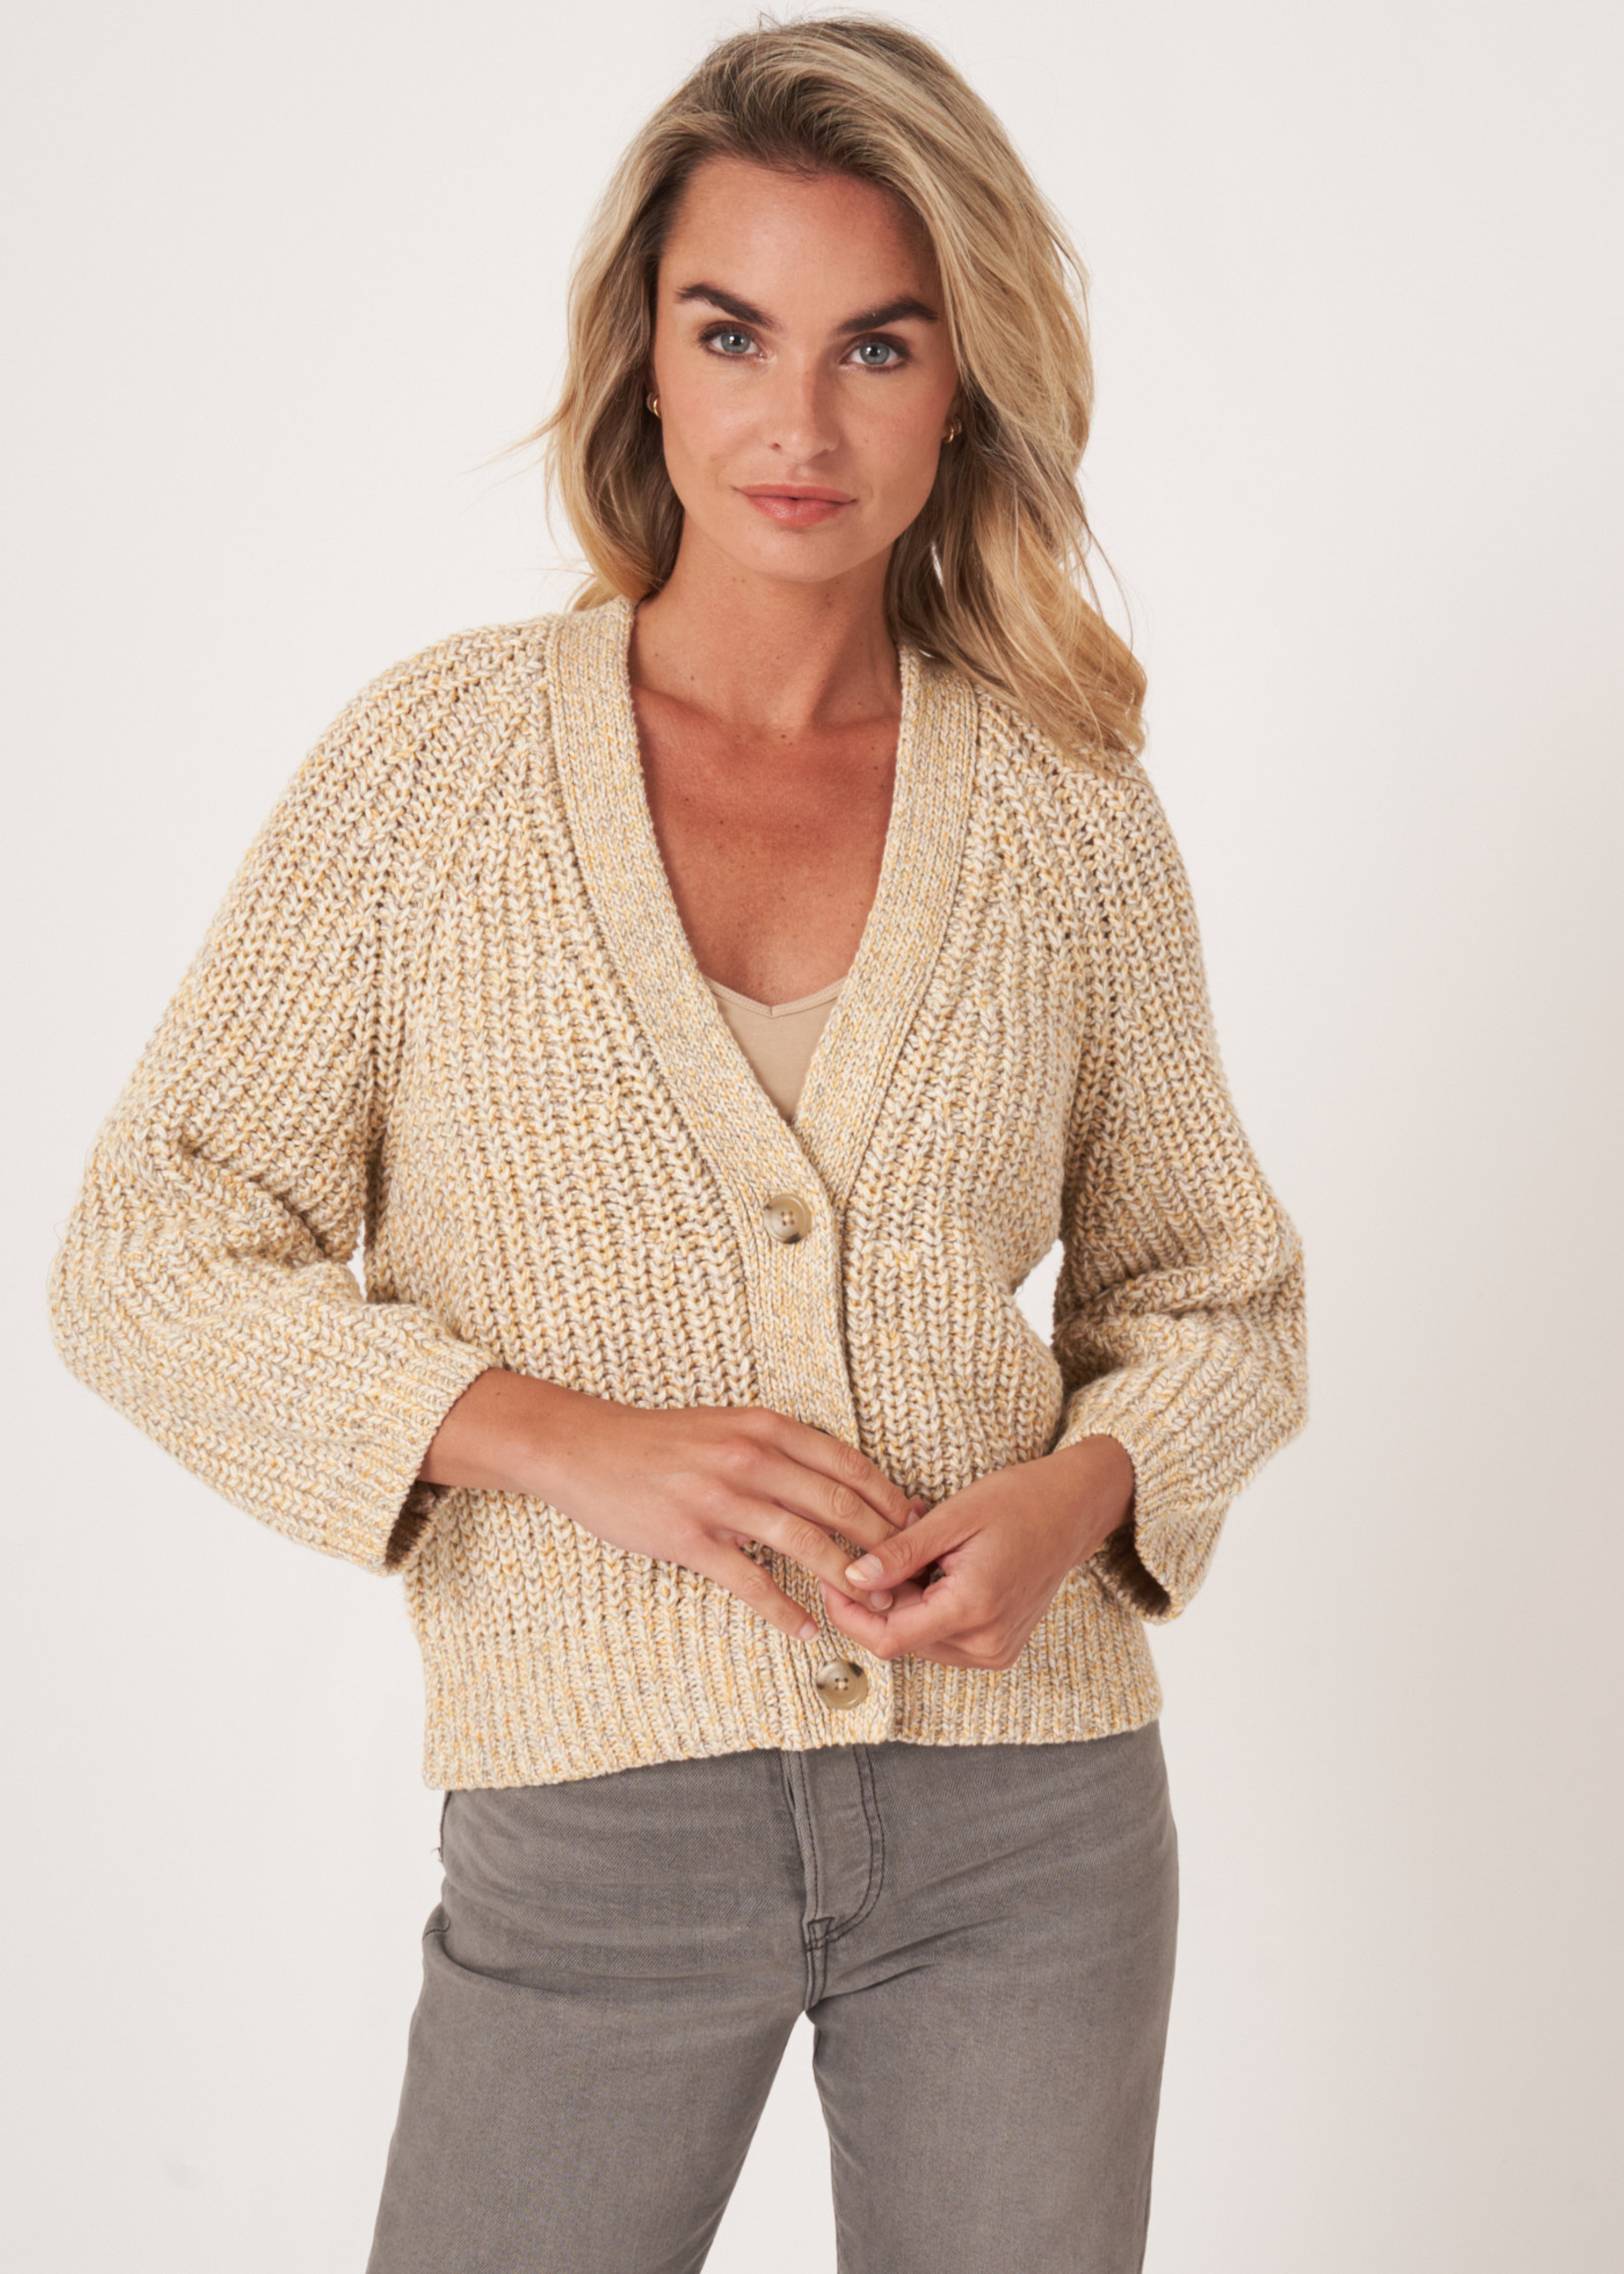 Repeat Repeat cotton knit cardigan 400874